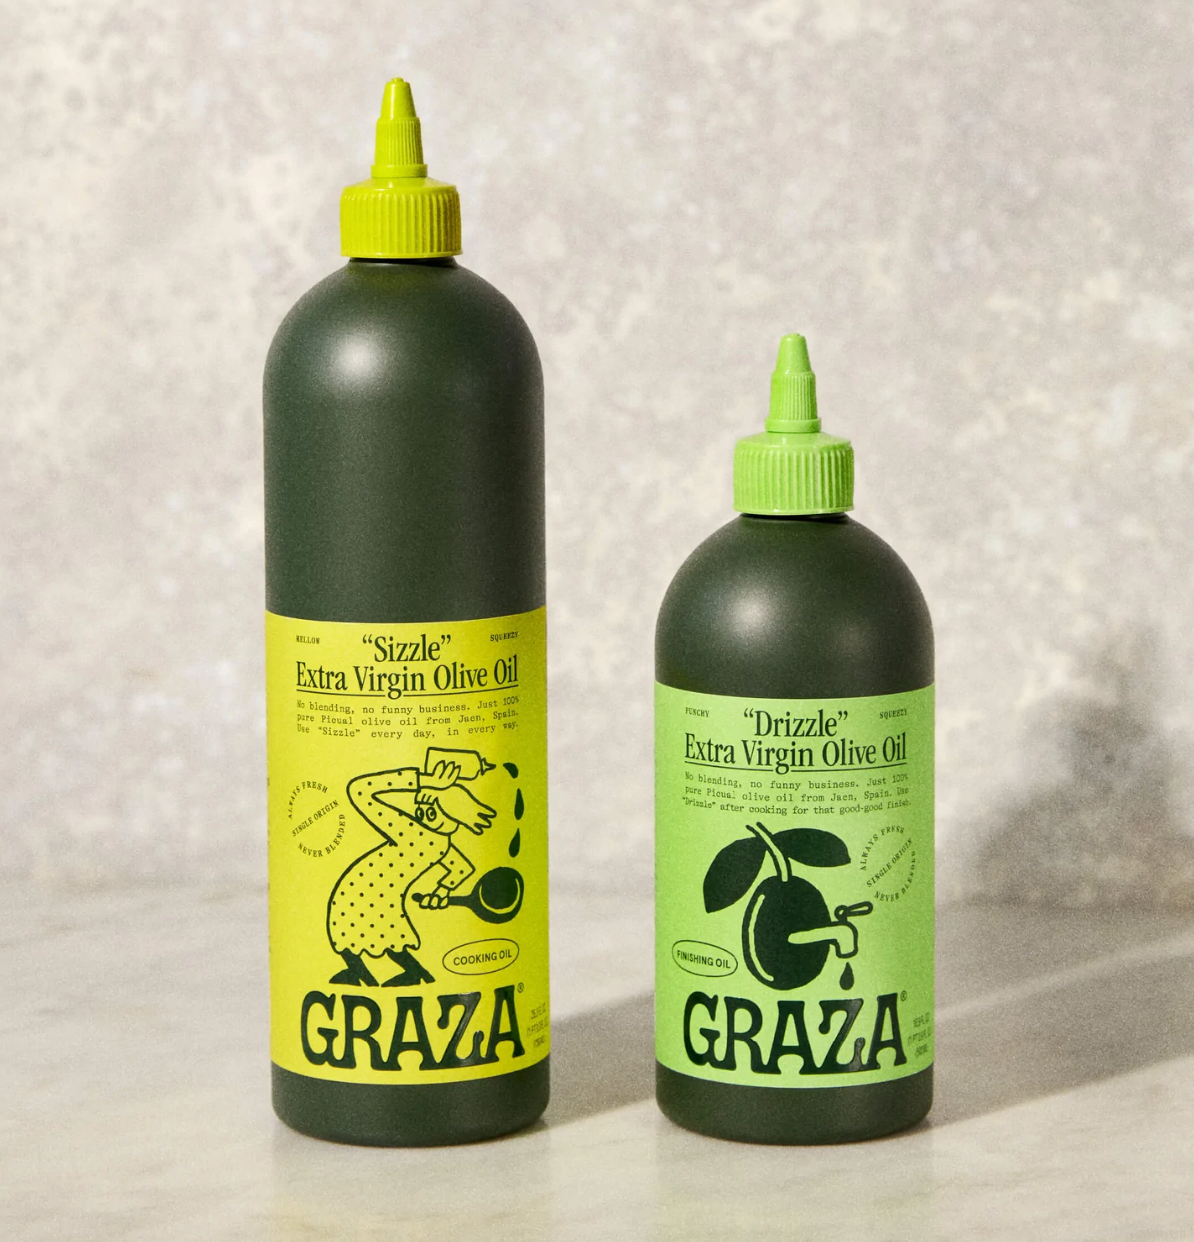 Graza “Drizzle” & “Sizzle” Extra Virgin Olive Oil Duo